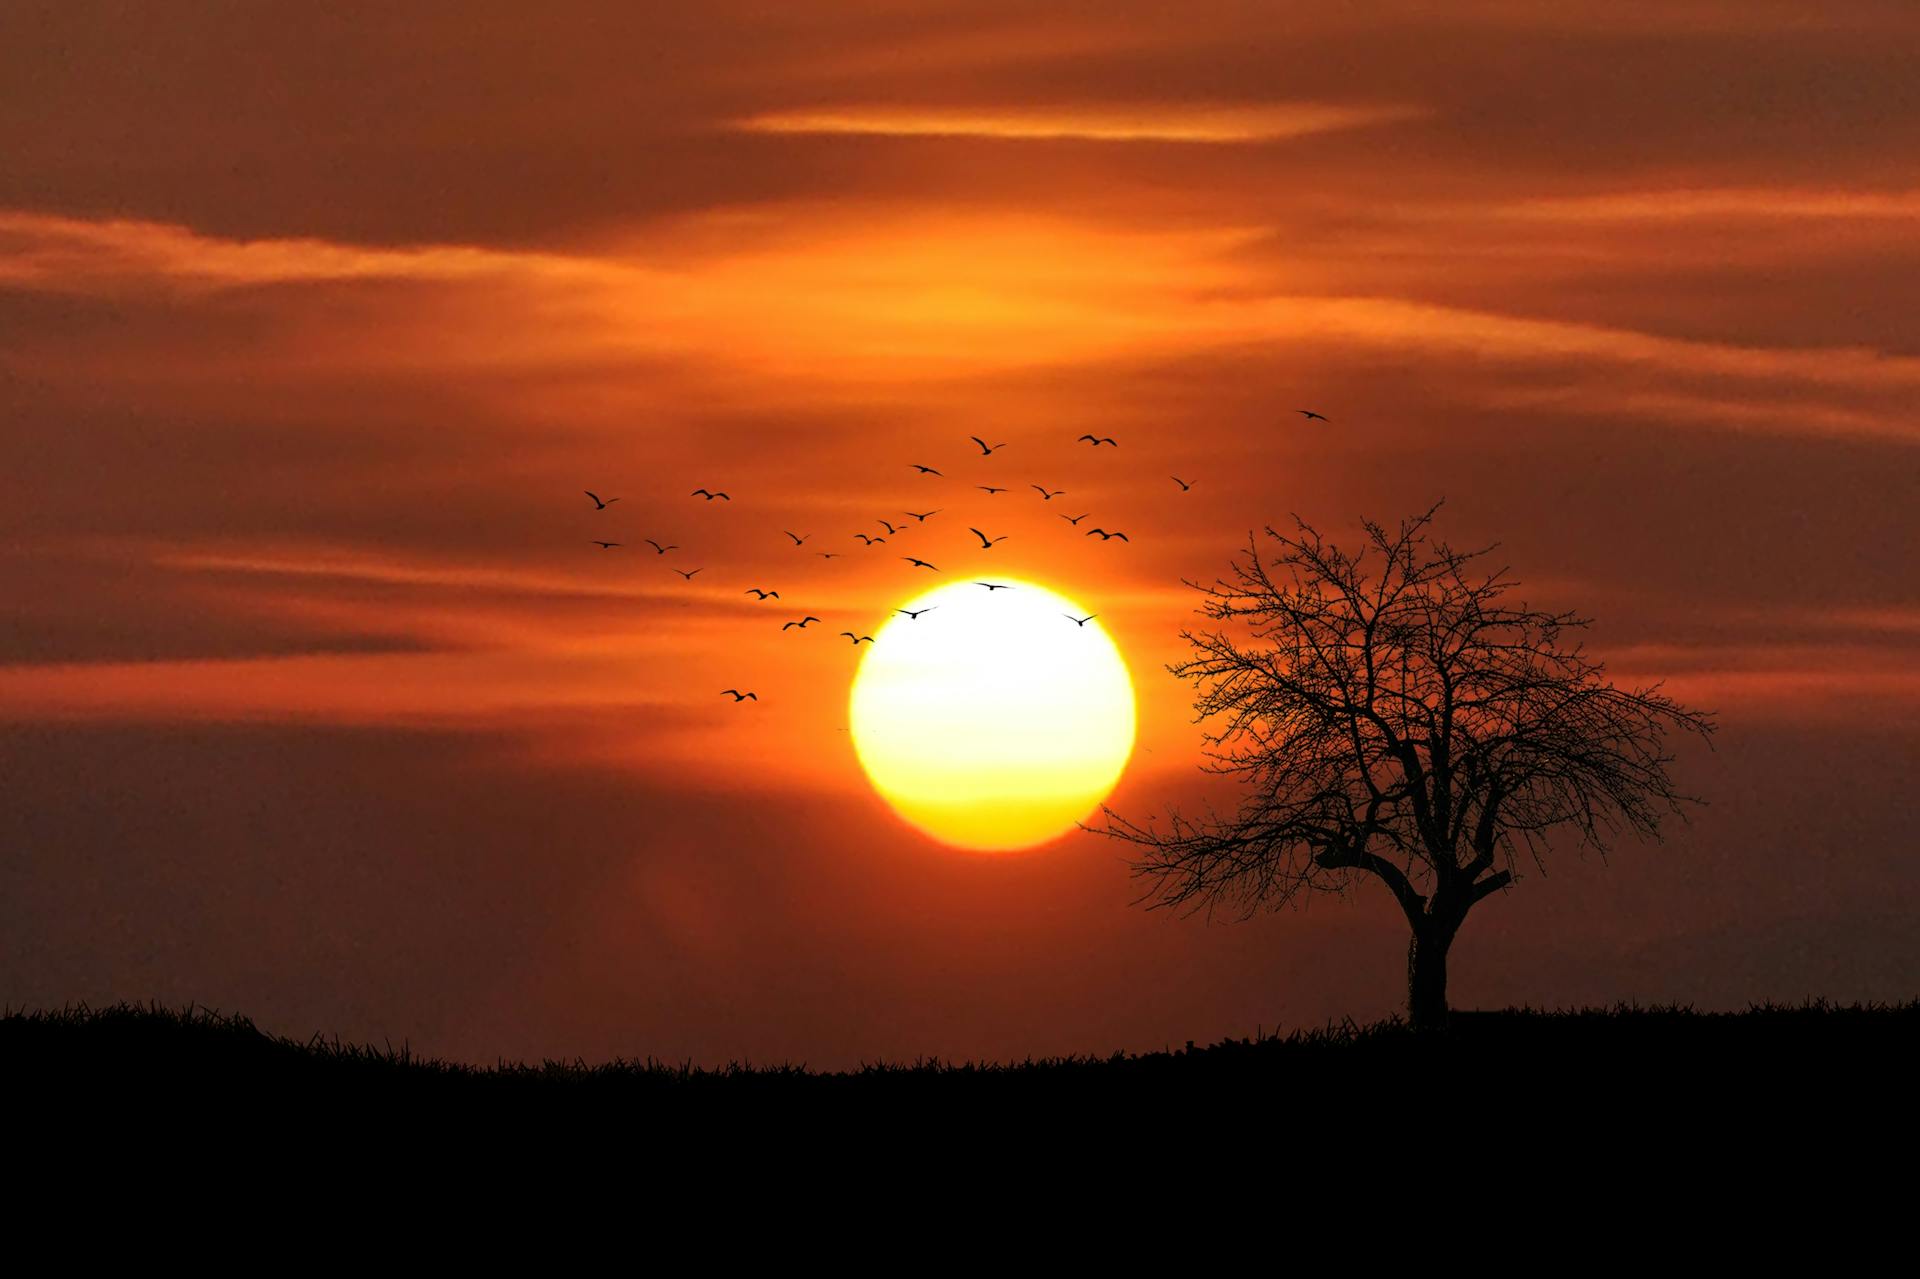 A flock of birds flying over a bare tree overlooking a sunset | Source: Pexels